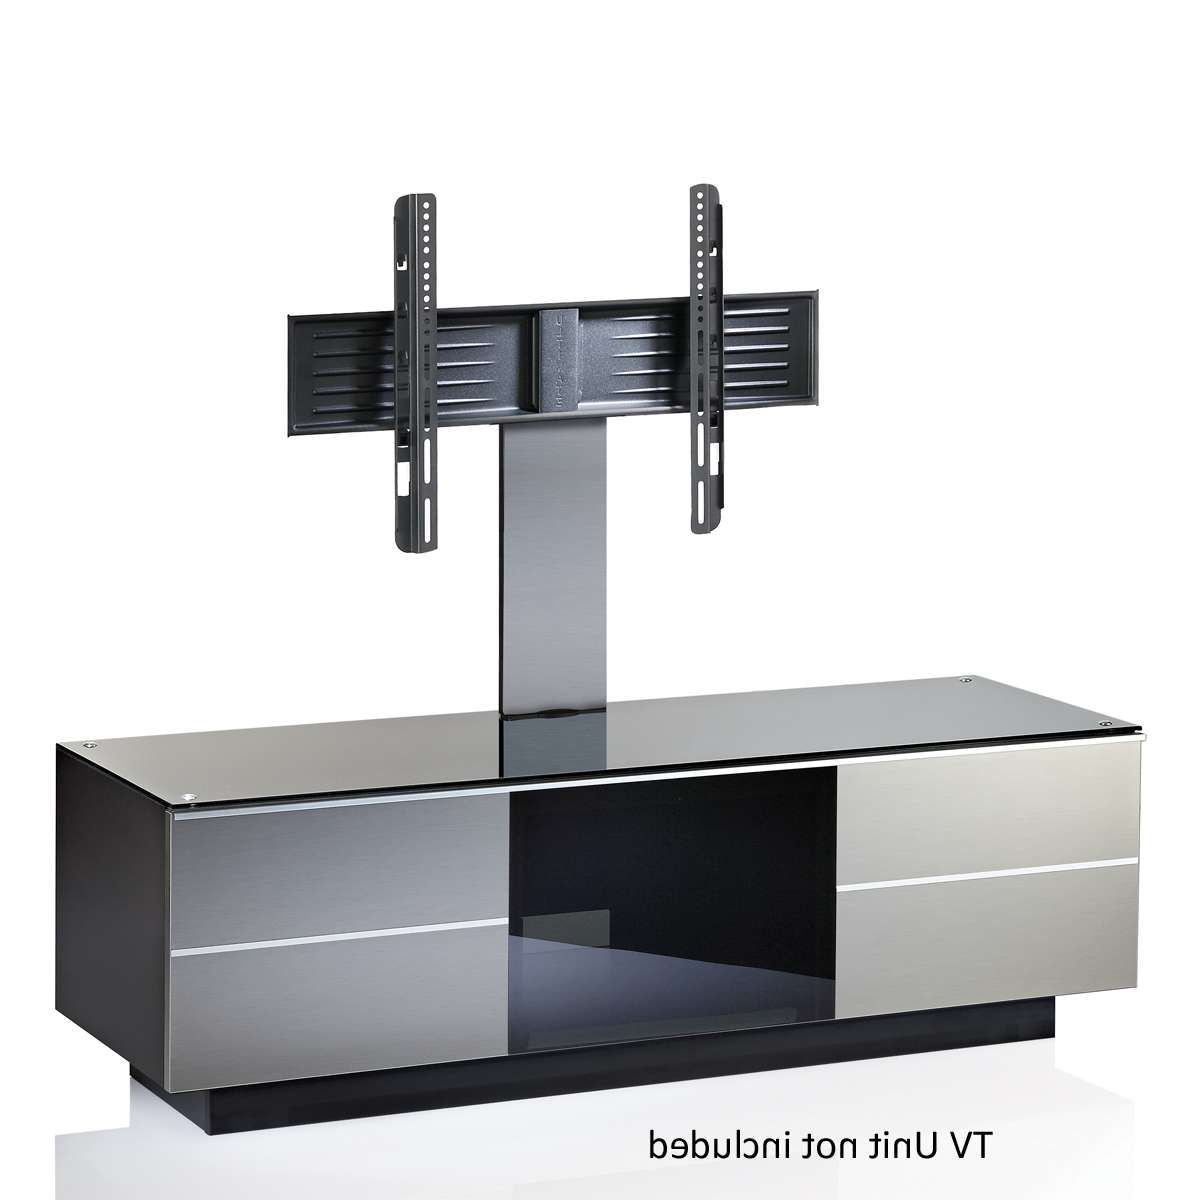 Inox G B 80 Inx Cantilever Tv Bracket,ukcf Ultimate,,uk Cf In Cantilever Tv Stands (View 10 of 15)